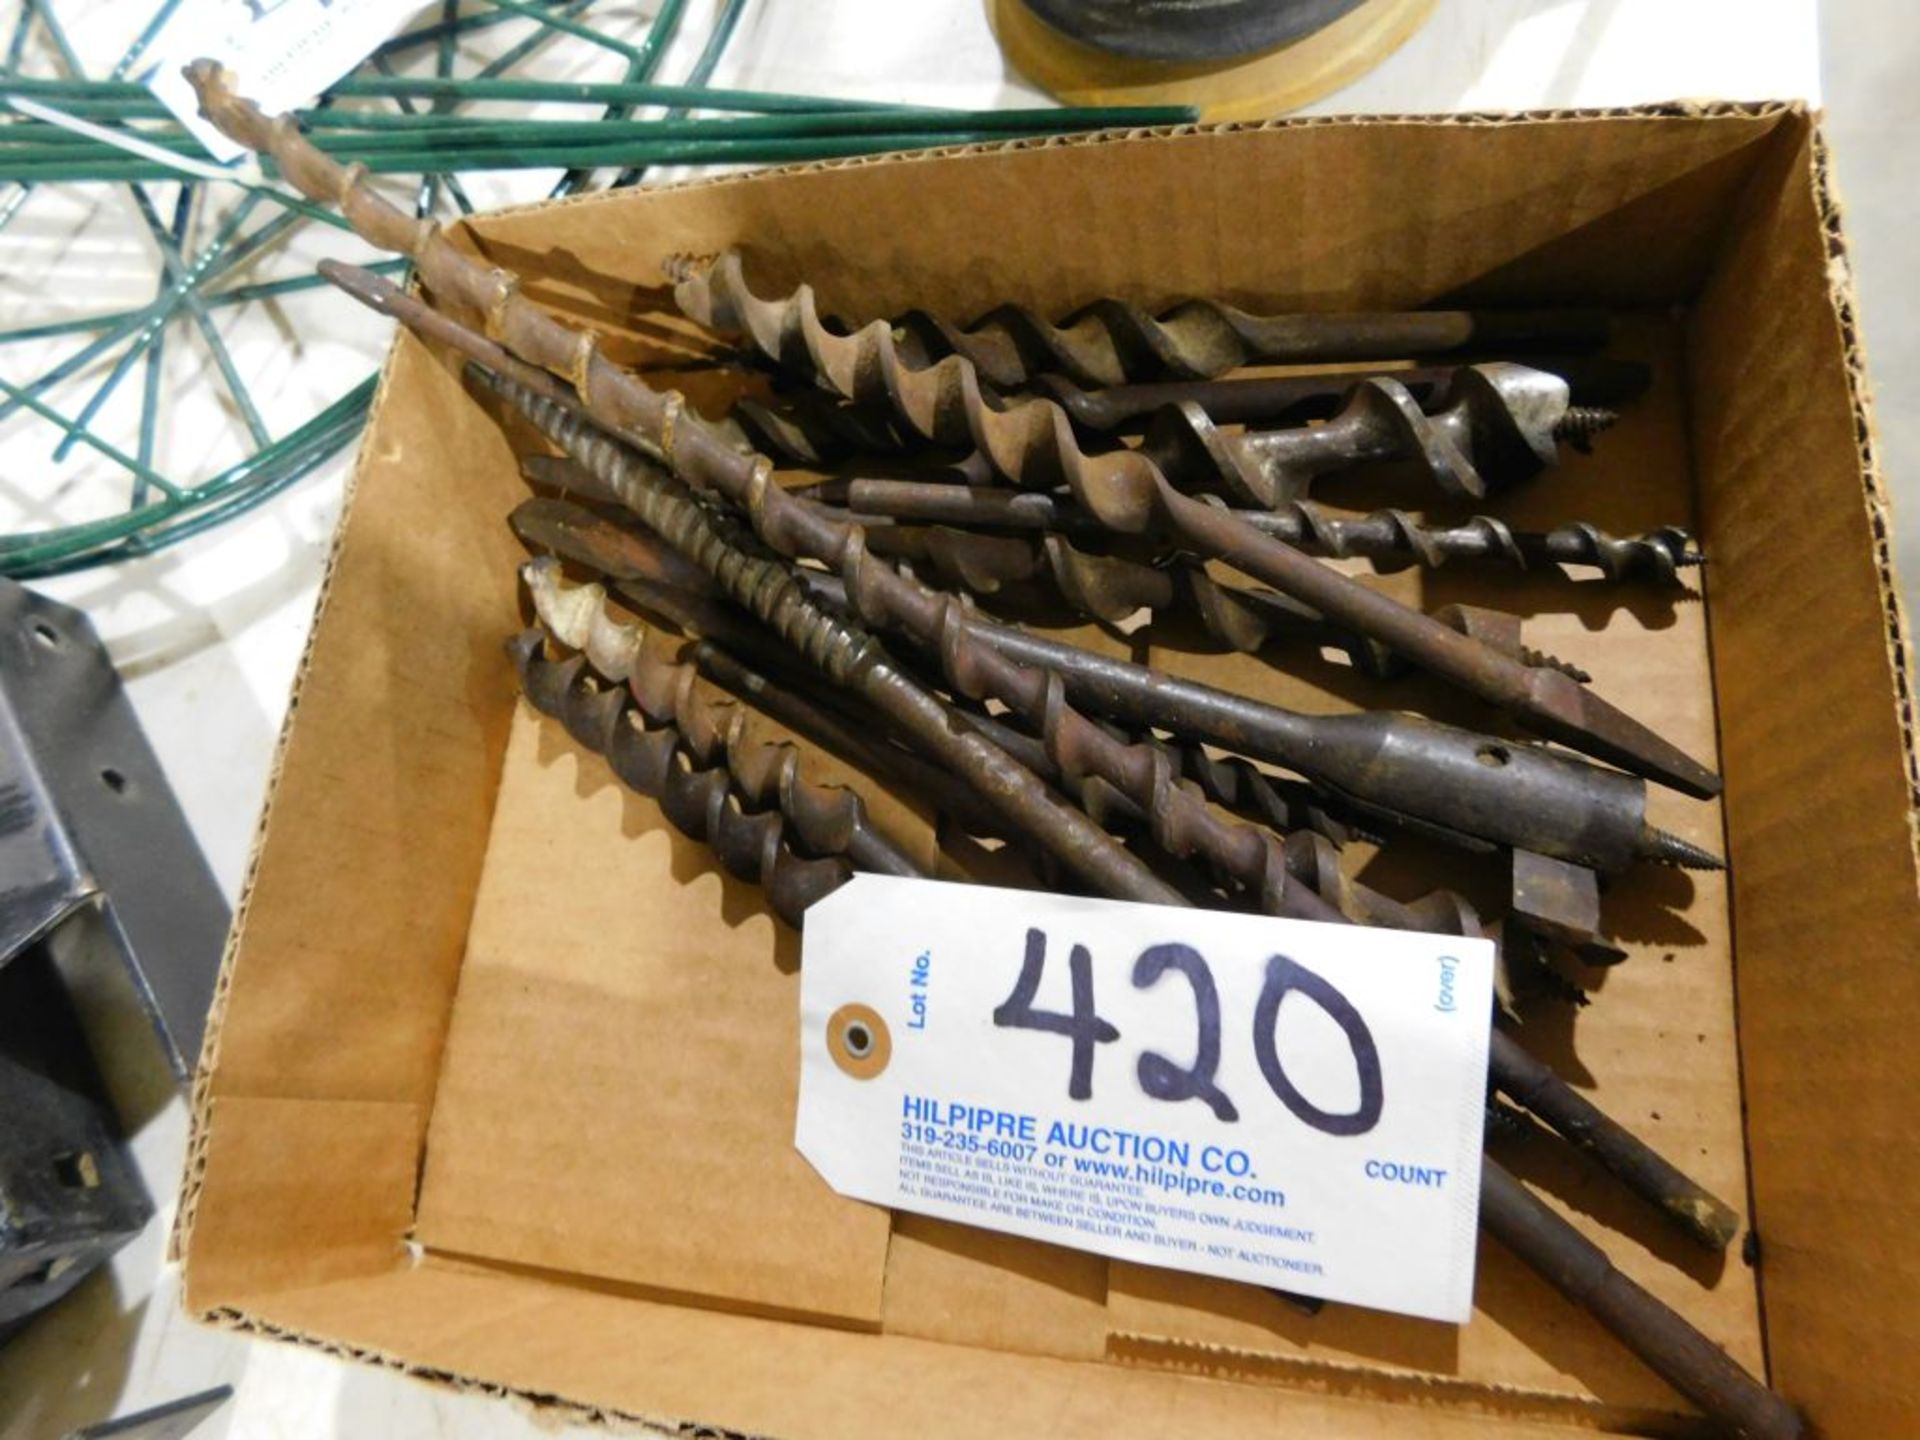 Drill bit. (Located at and to be picked up at: 2862 Wagner Rd., Waterloo, IA)